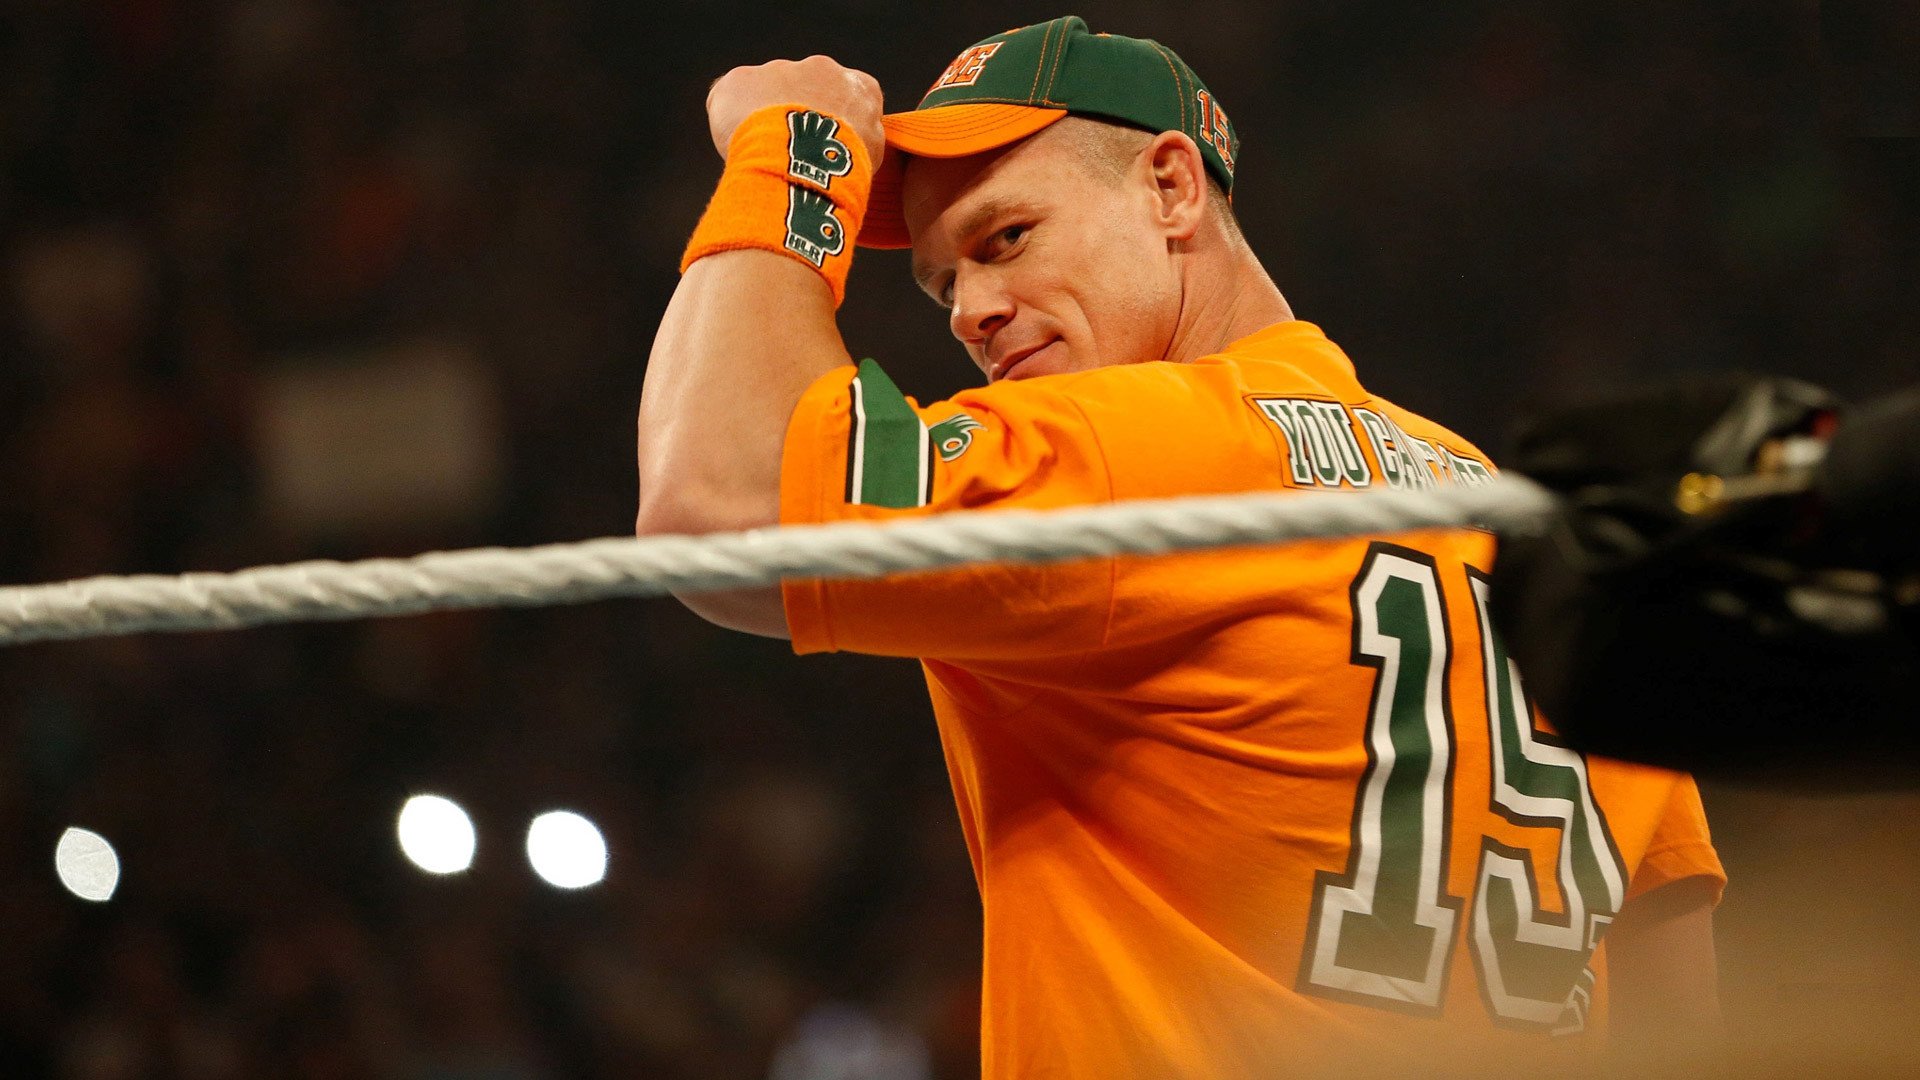 John Cena Wallpaper HD Background Of Your Choice